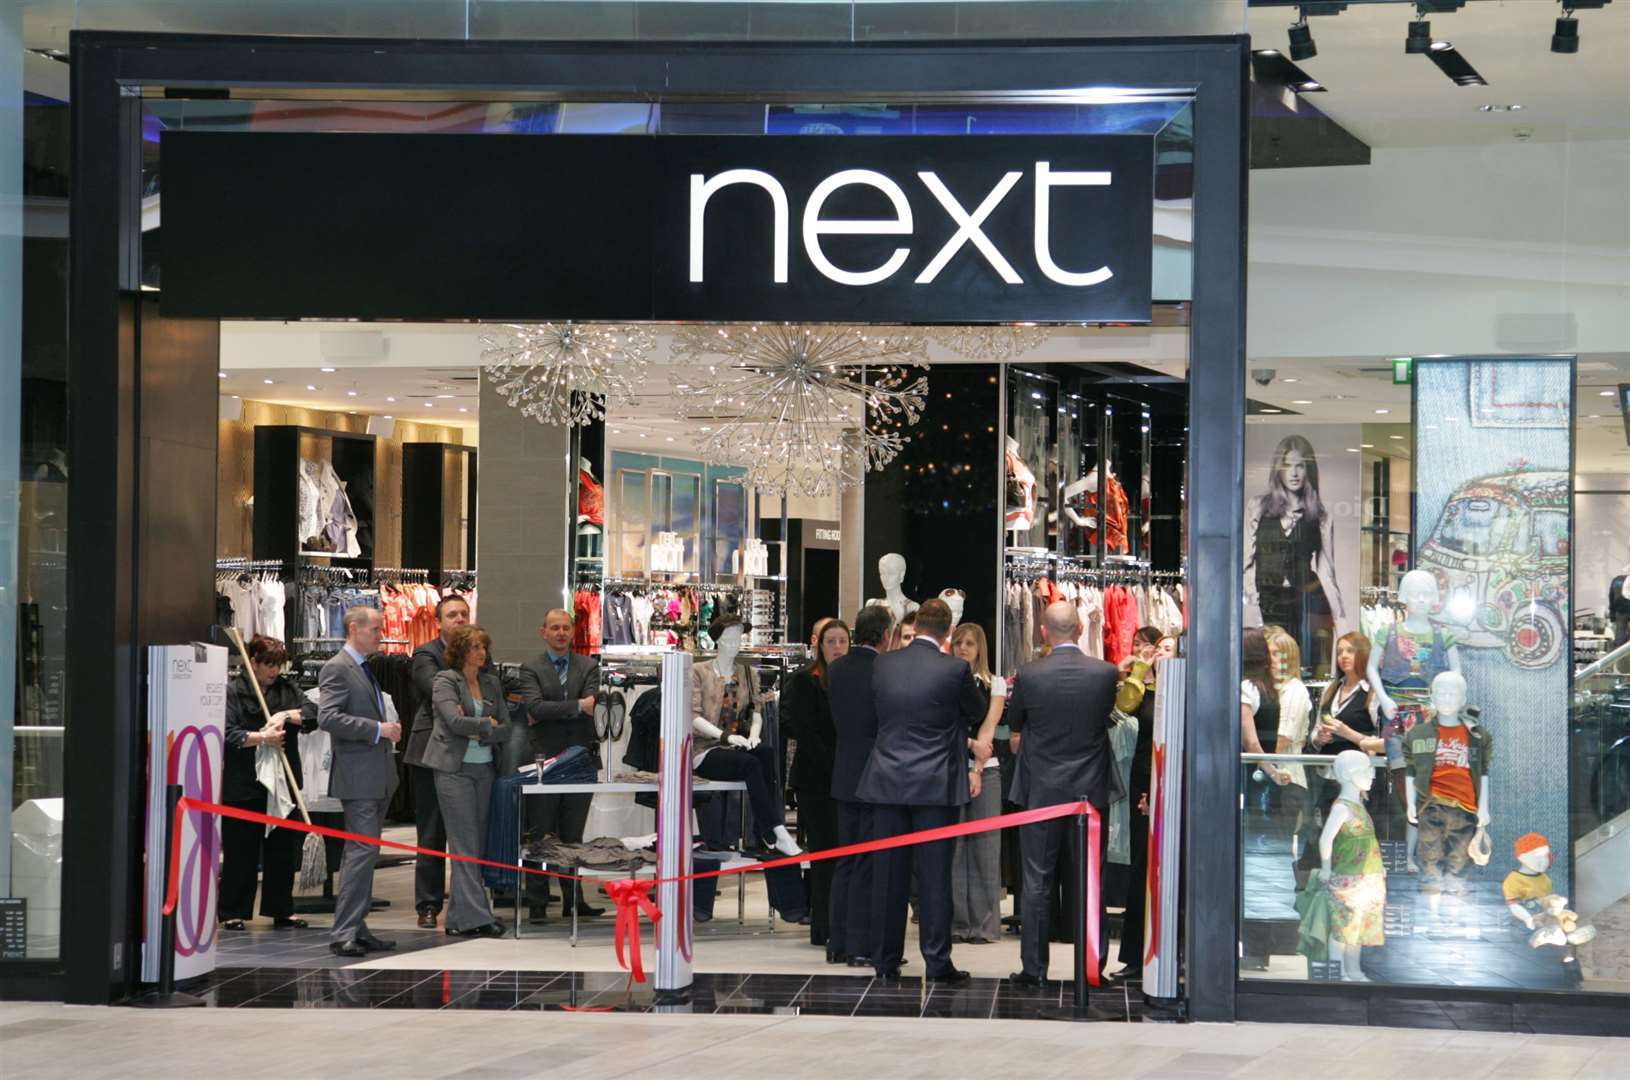 Next opened in County Square in 2008